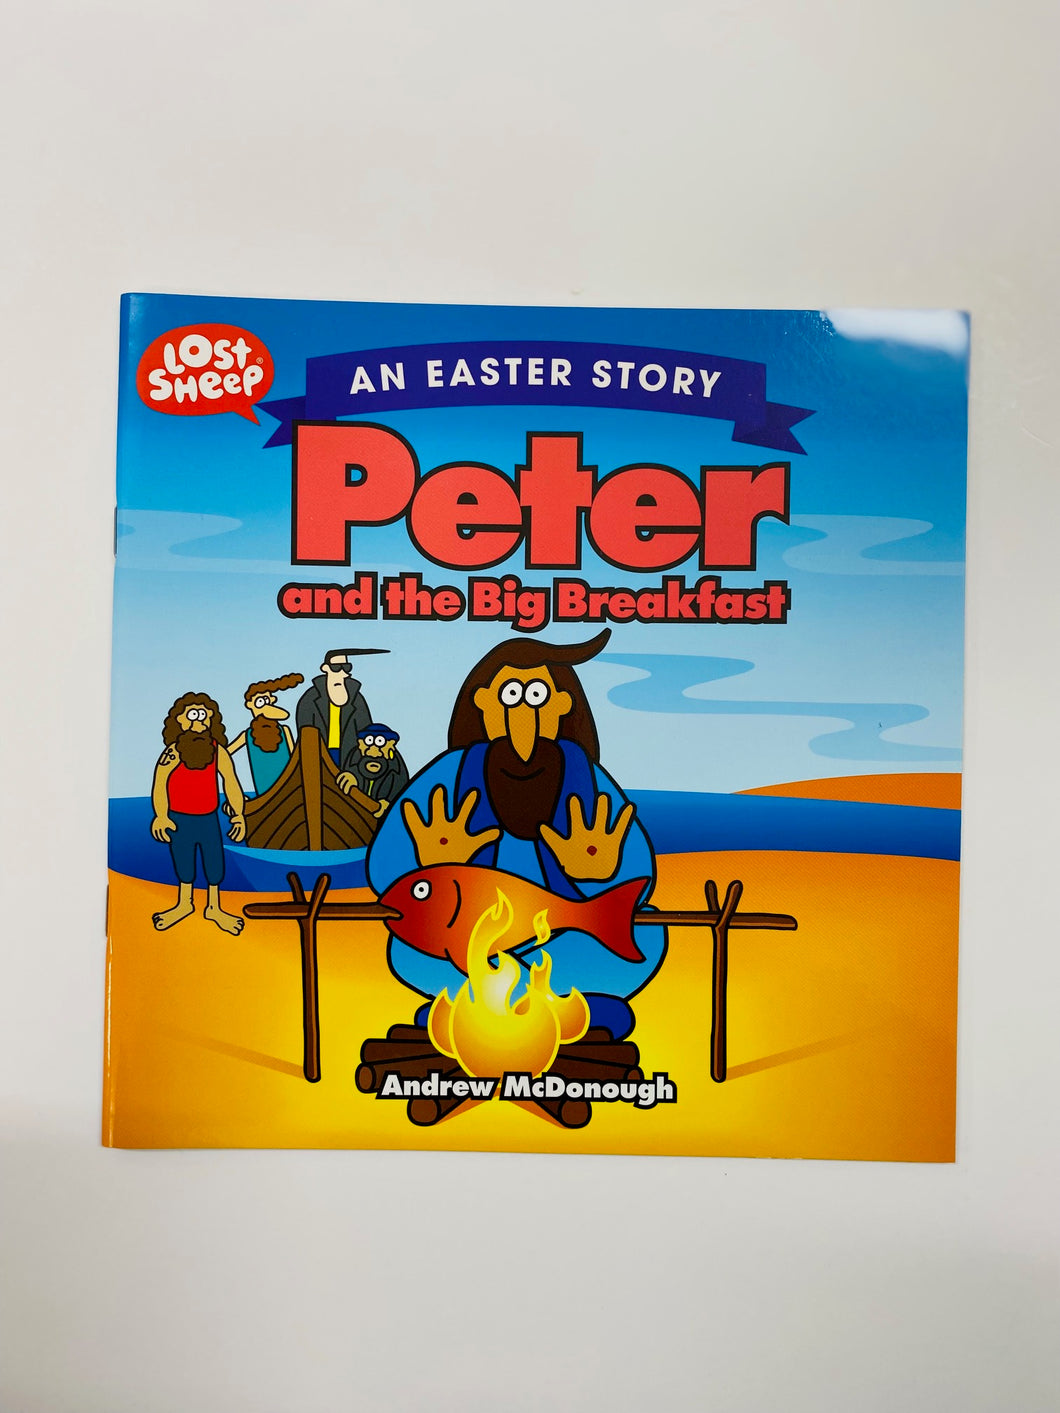 Lost Sheep: Peter and the Big Breakfast